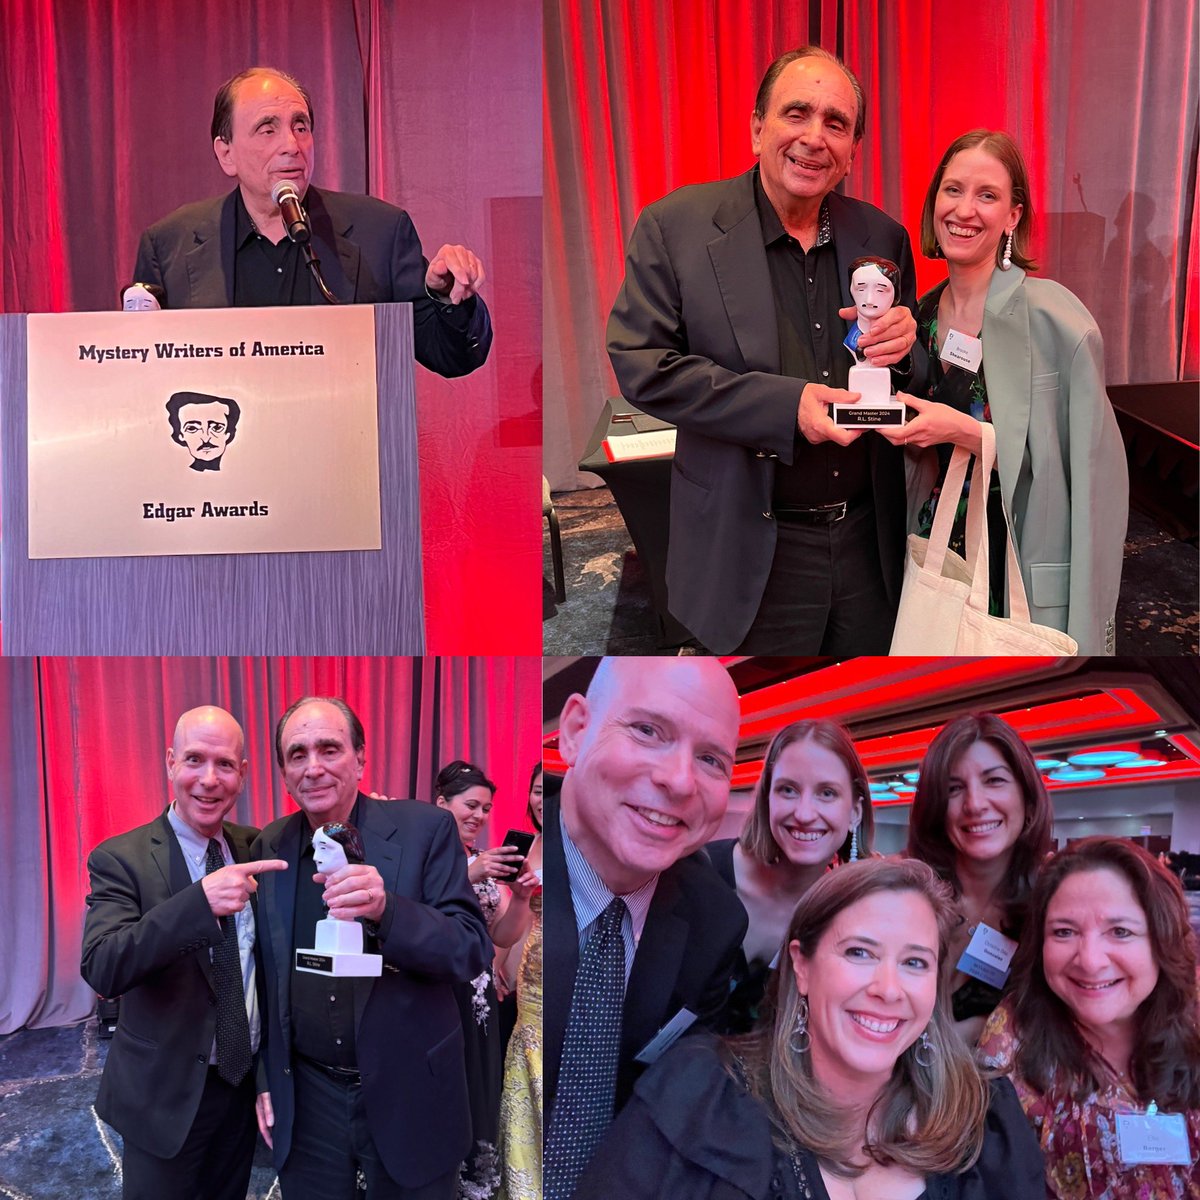 What’s better or more fun than hanging out and laughing with old friends celebrating someone you love? Getting to make some new ones. Today & always grateful for Jovial Bob Stine.@RL_Stine #Goosebumps #Edgars2024 #GrandMaster @Scholastic @ChristinaDG @shearbrooke @BergerErin